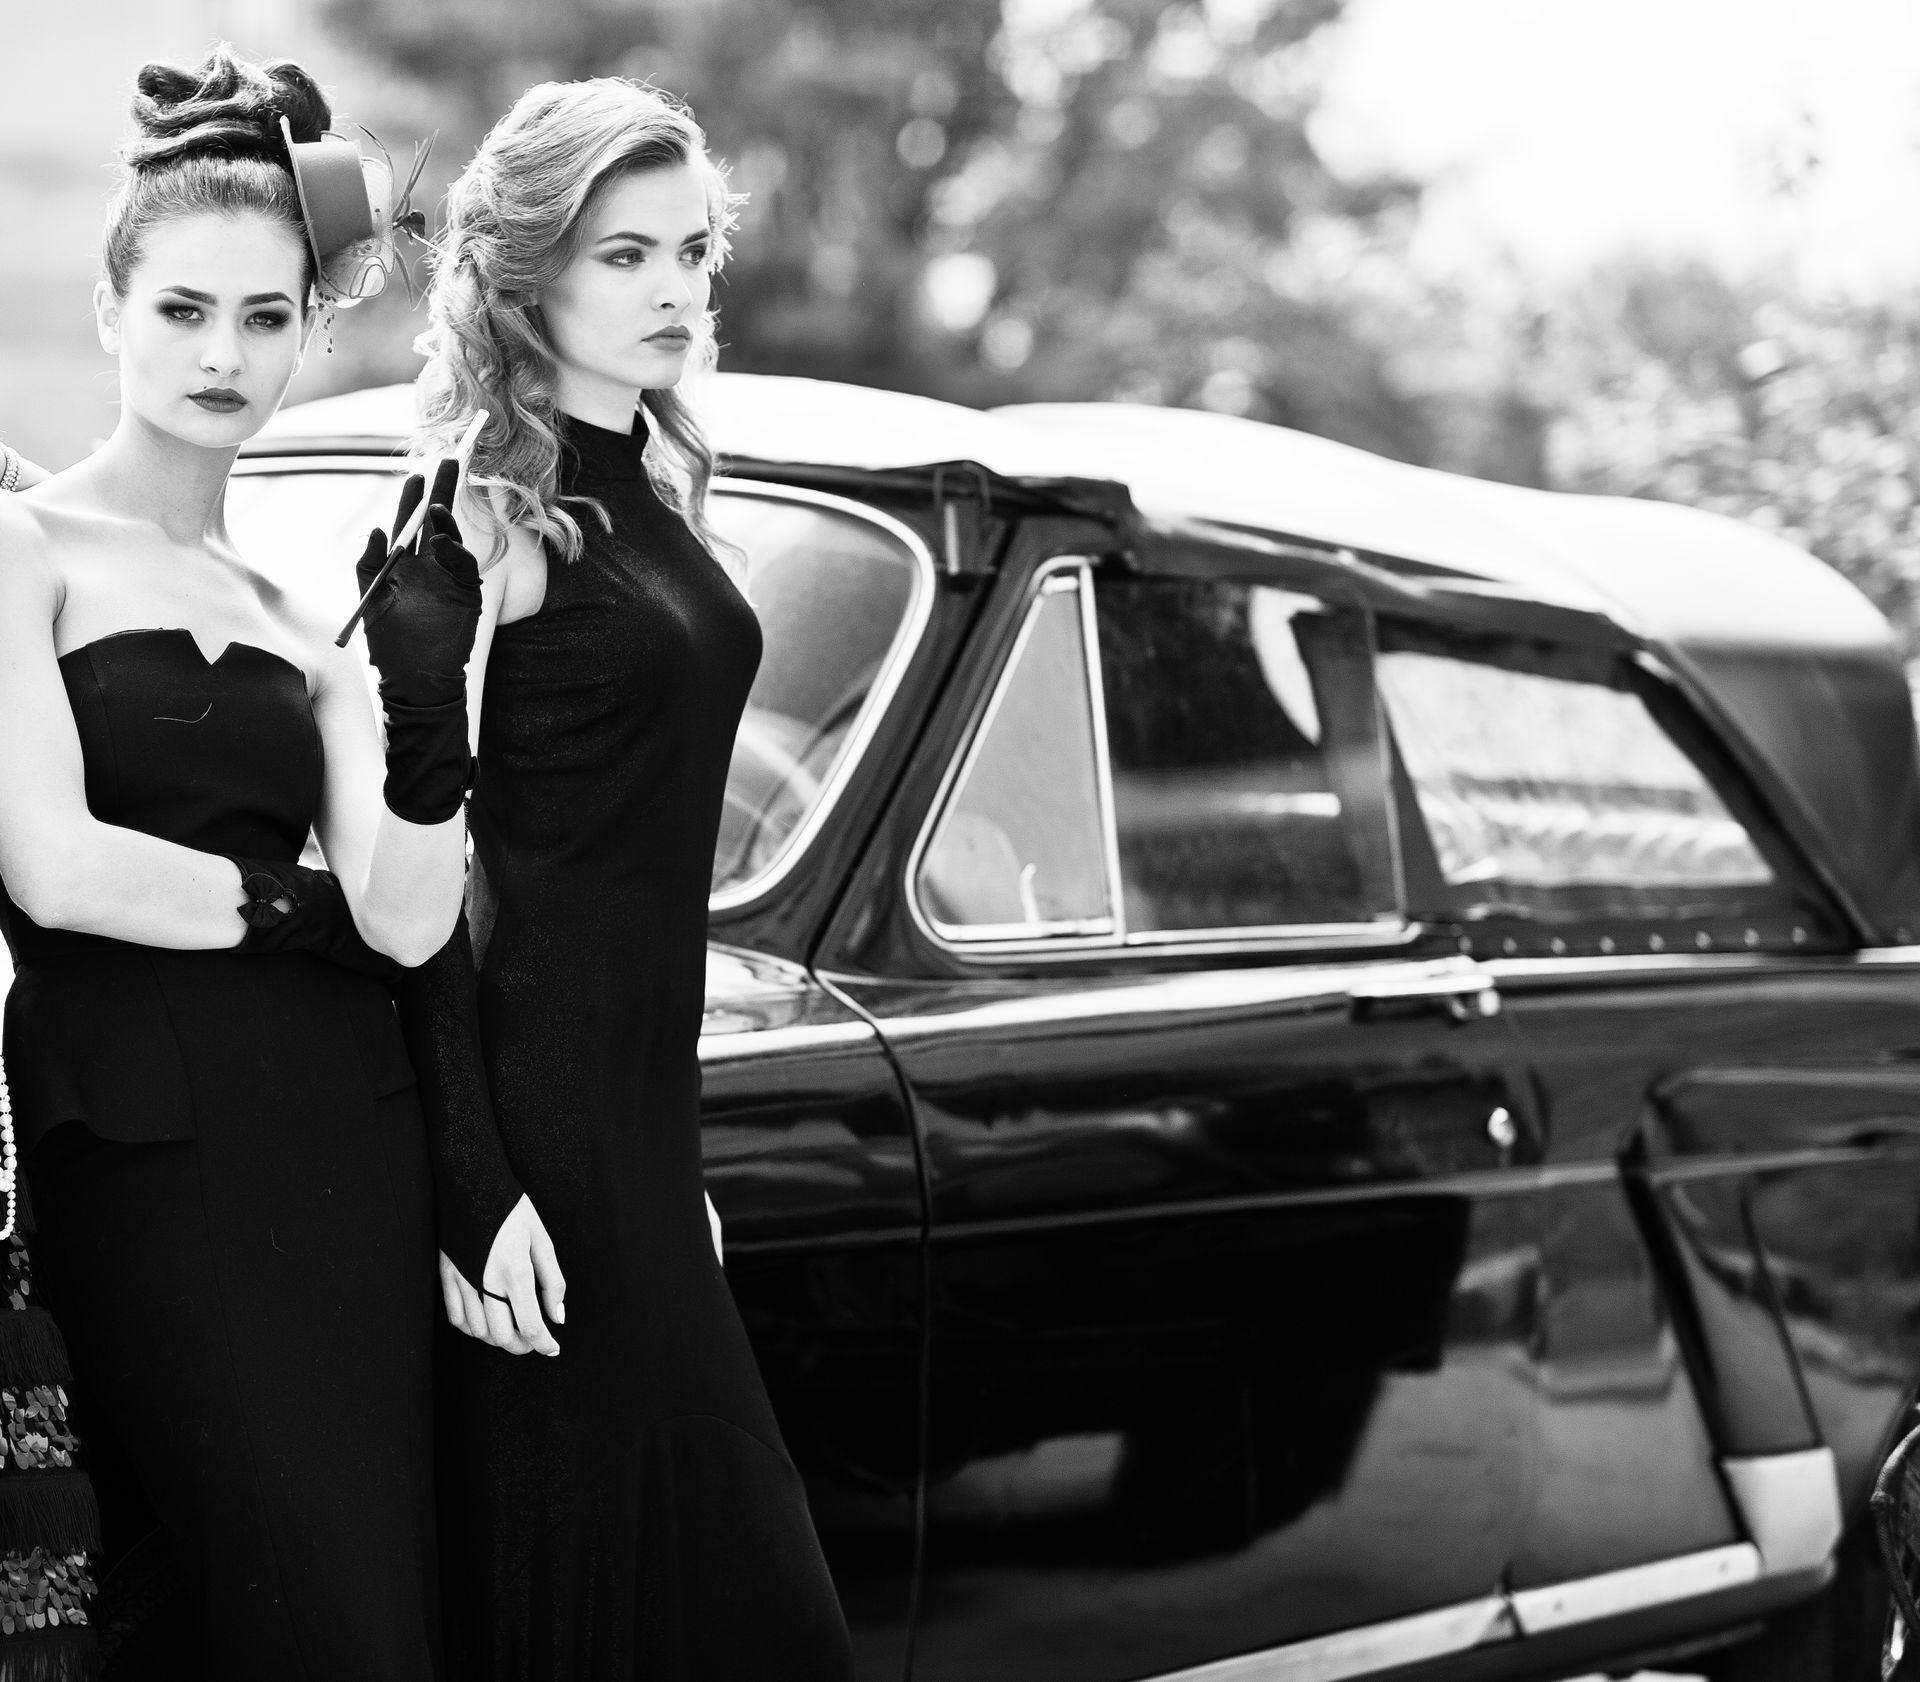 two women in black dresses are standing next to a black car